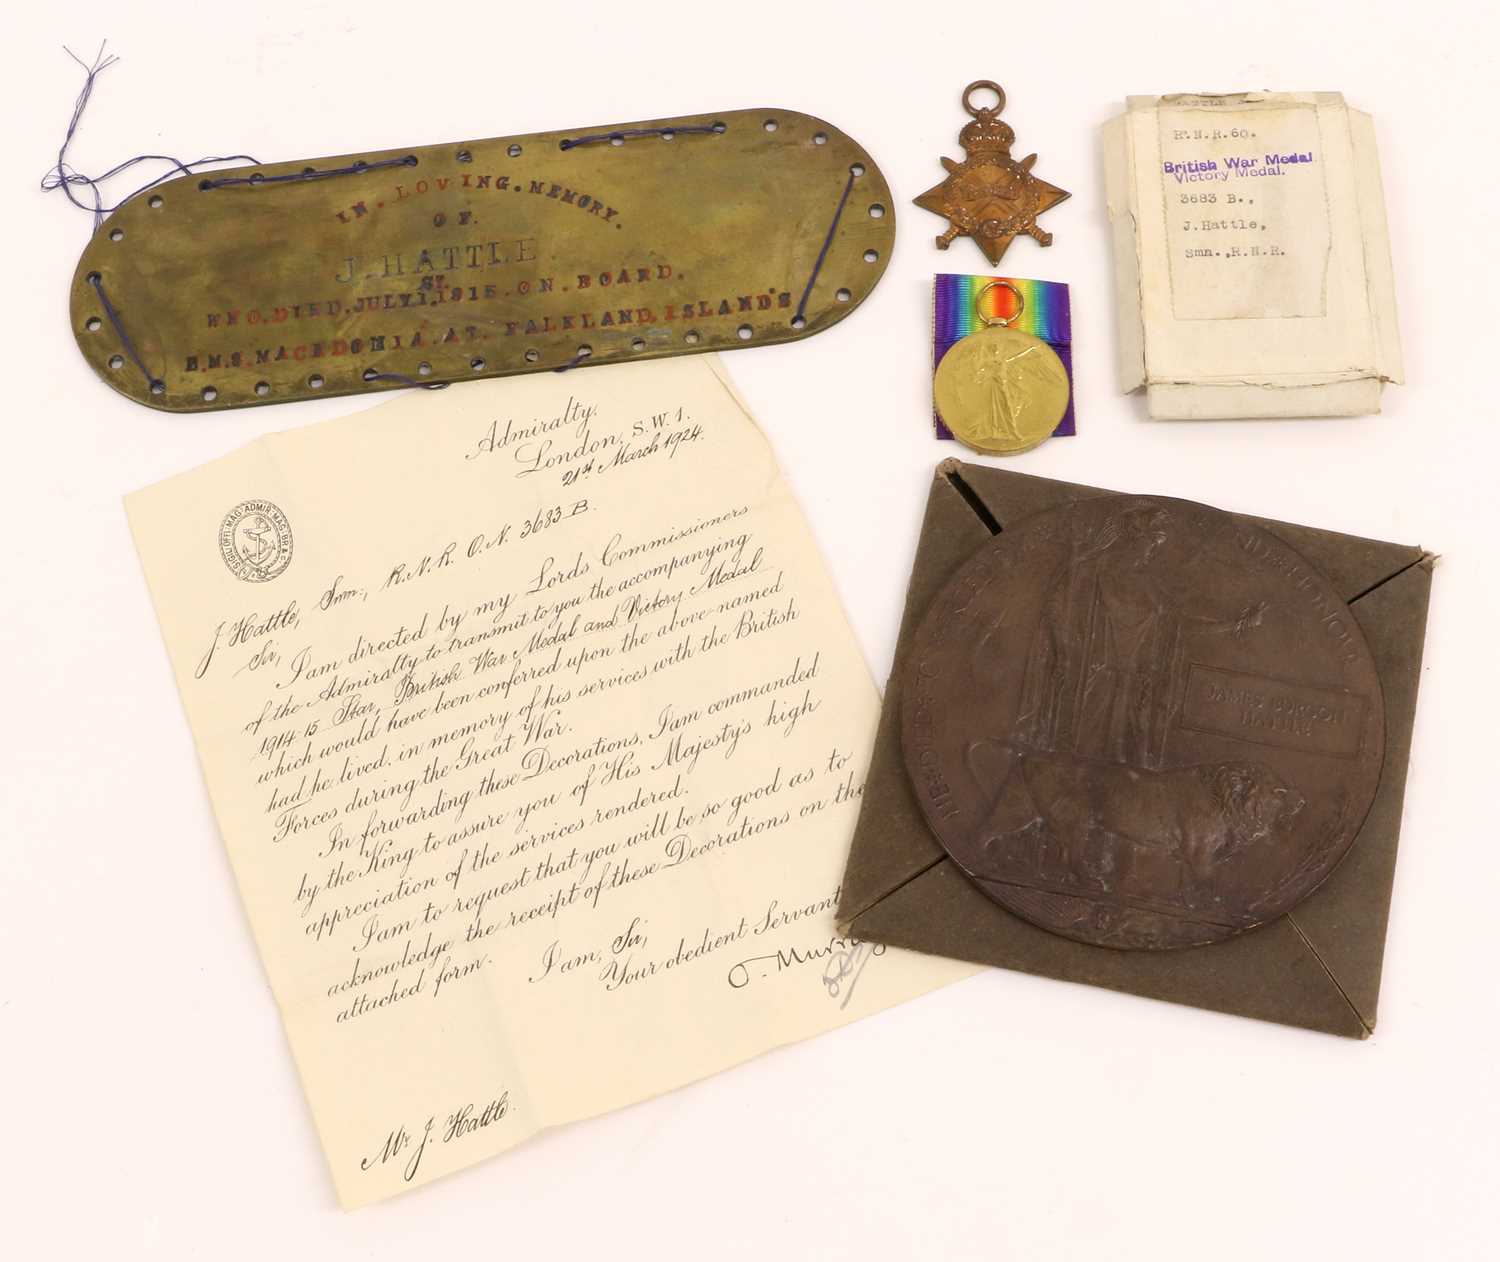 A 1914-15 Star, Victory Medal and Memorial Plaque, awarded to 3683B J.(James Burgon) HATTLE, SMN.